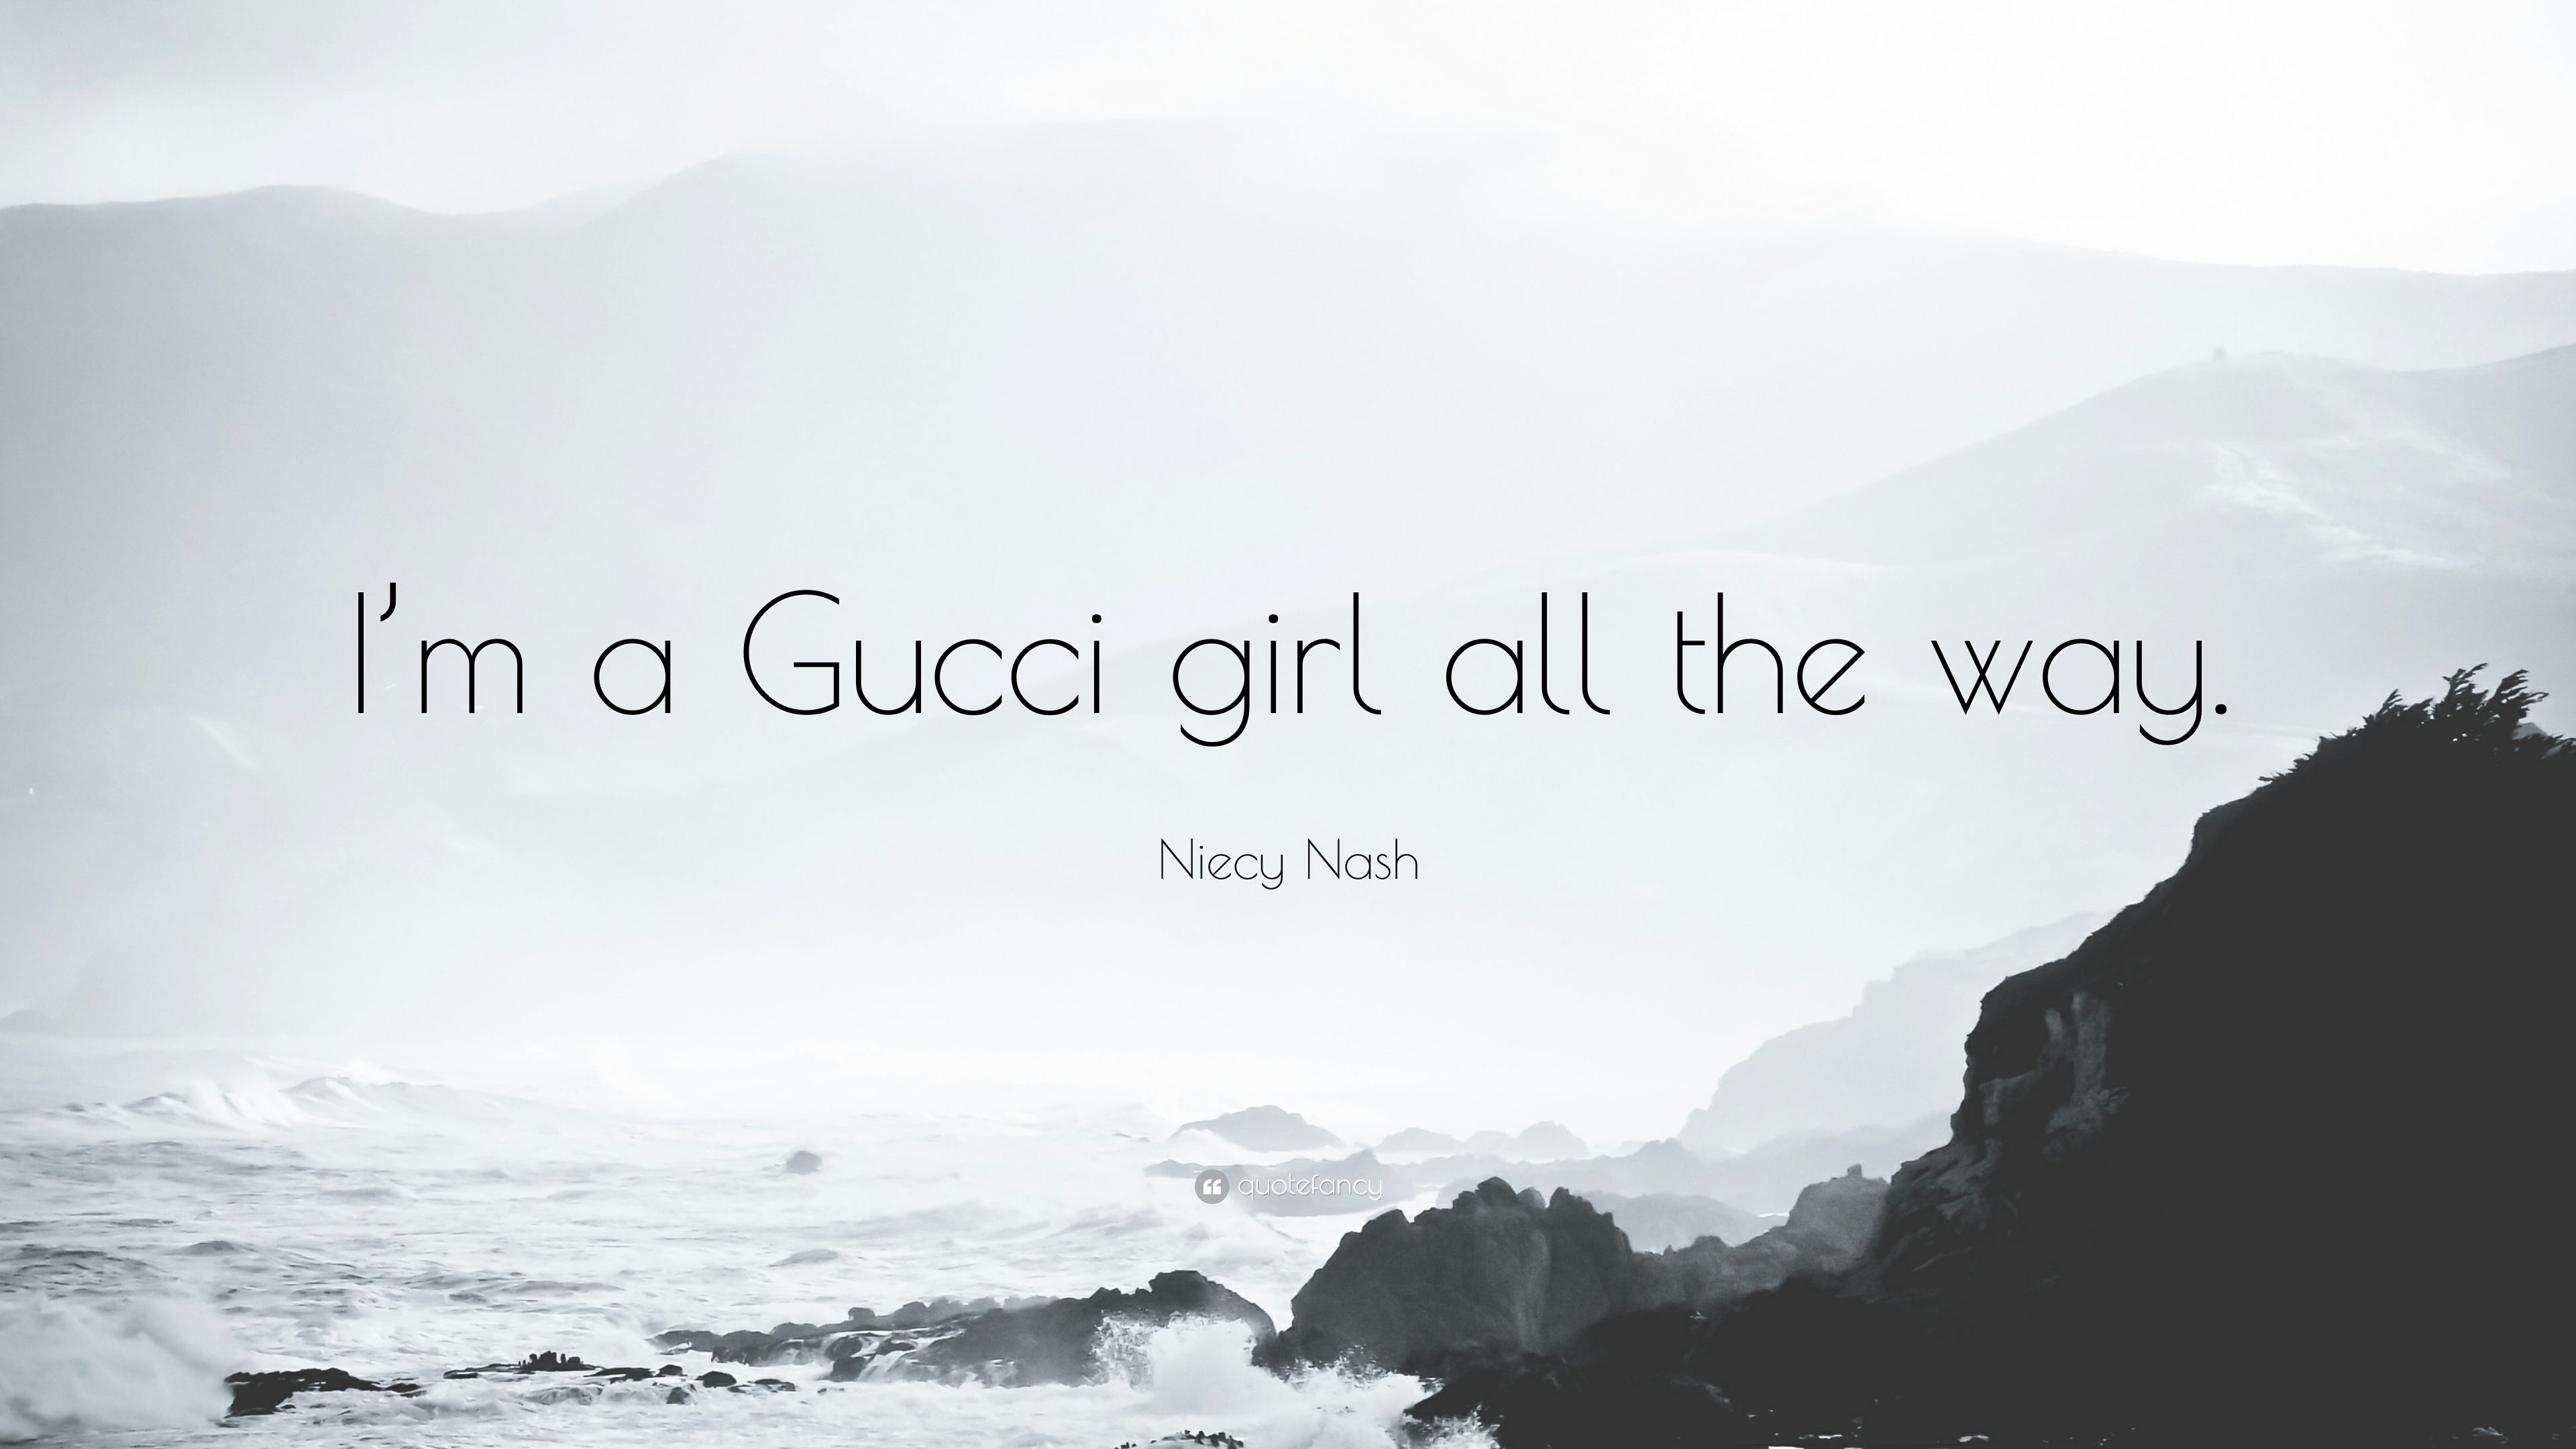 Niecy Nash Quote: “I'm a Gucci girl all the way.” 7 wallpaper